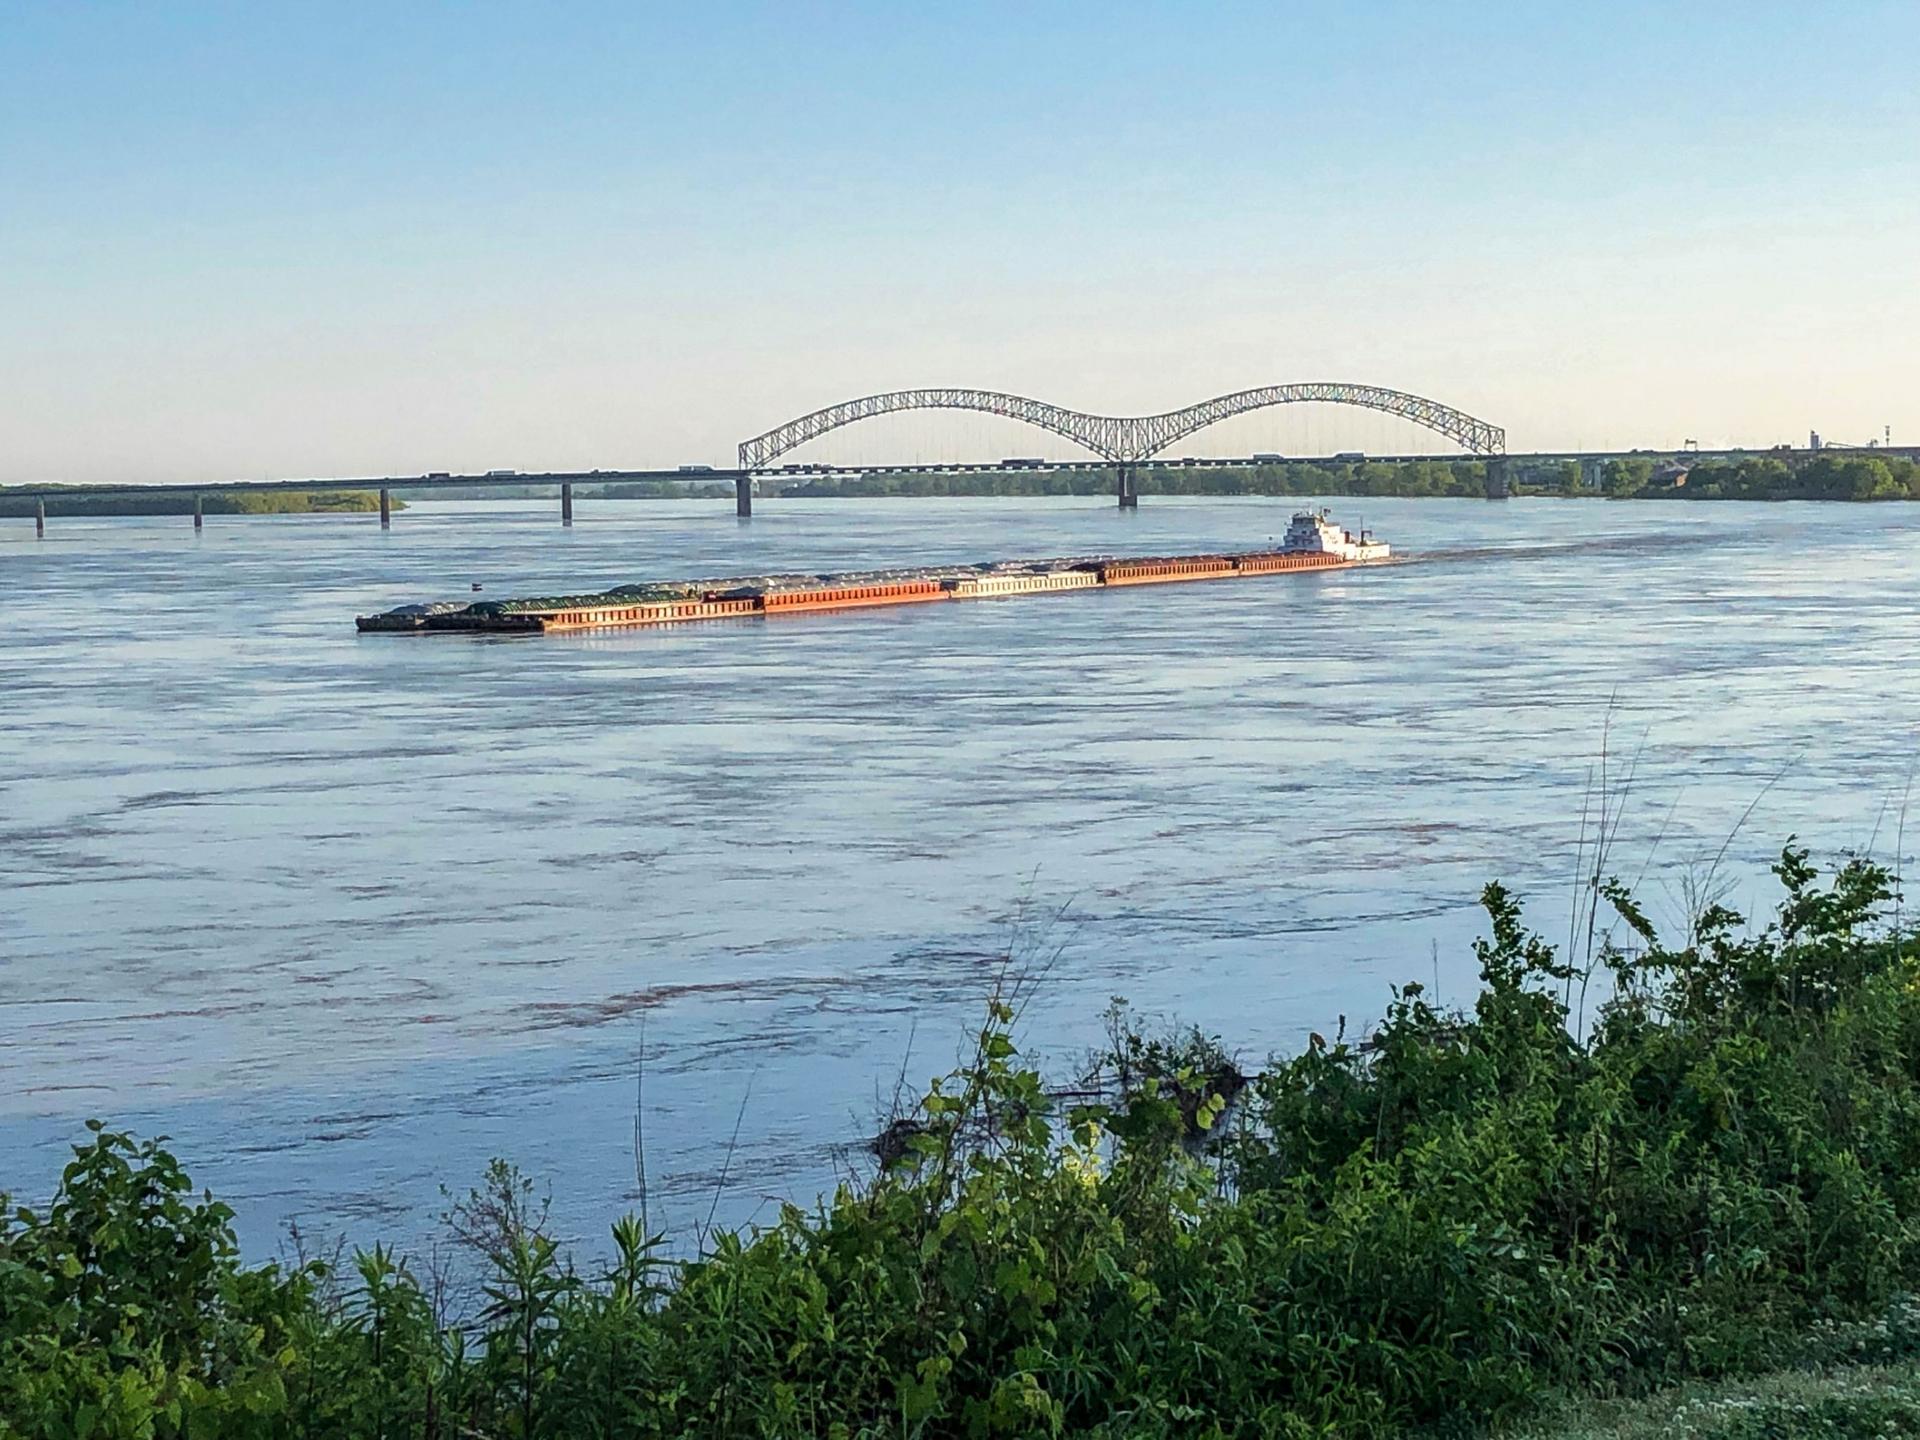 A barge is shown in the distance traveling on a blue river.